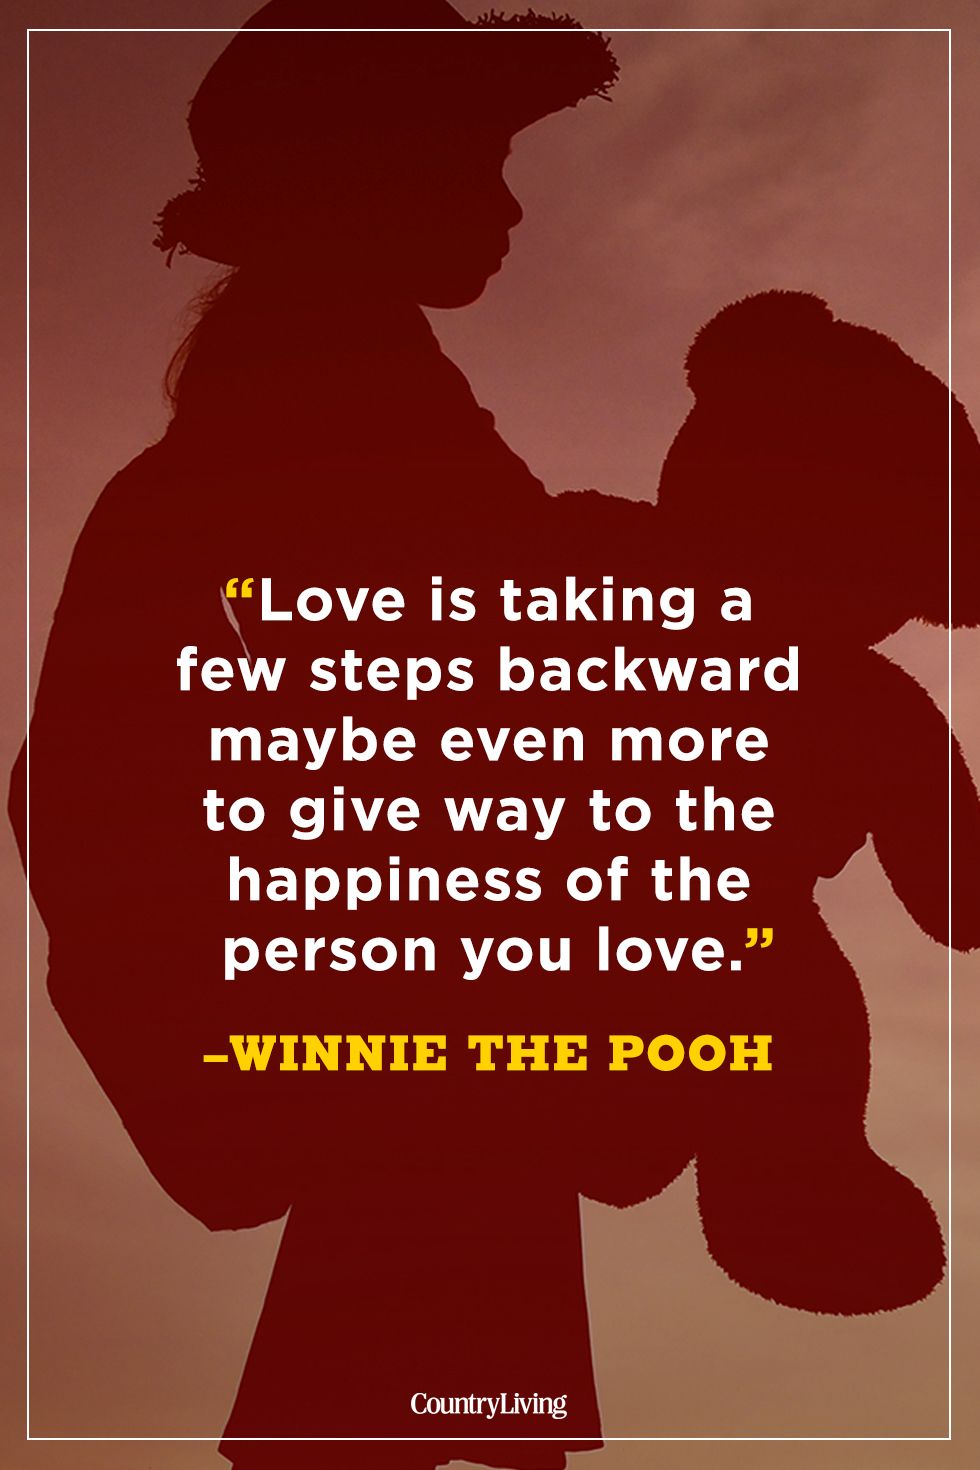 Best Winnie The Pooh Quotes Winnie The Pooh Friendship And Love Quotes